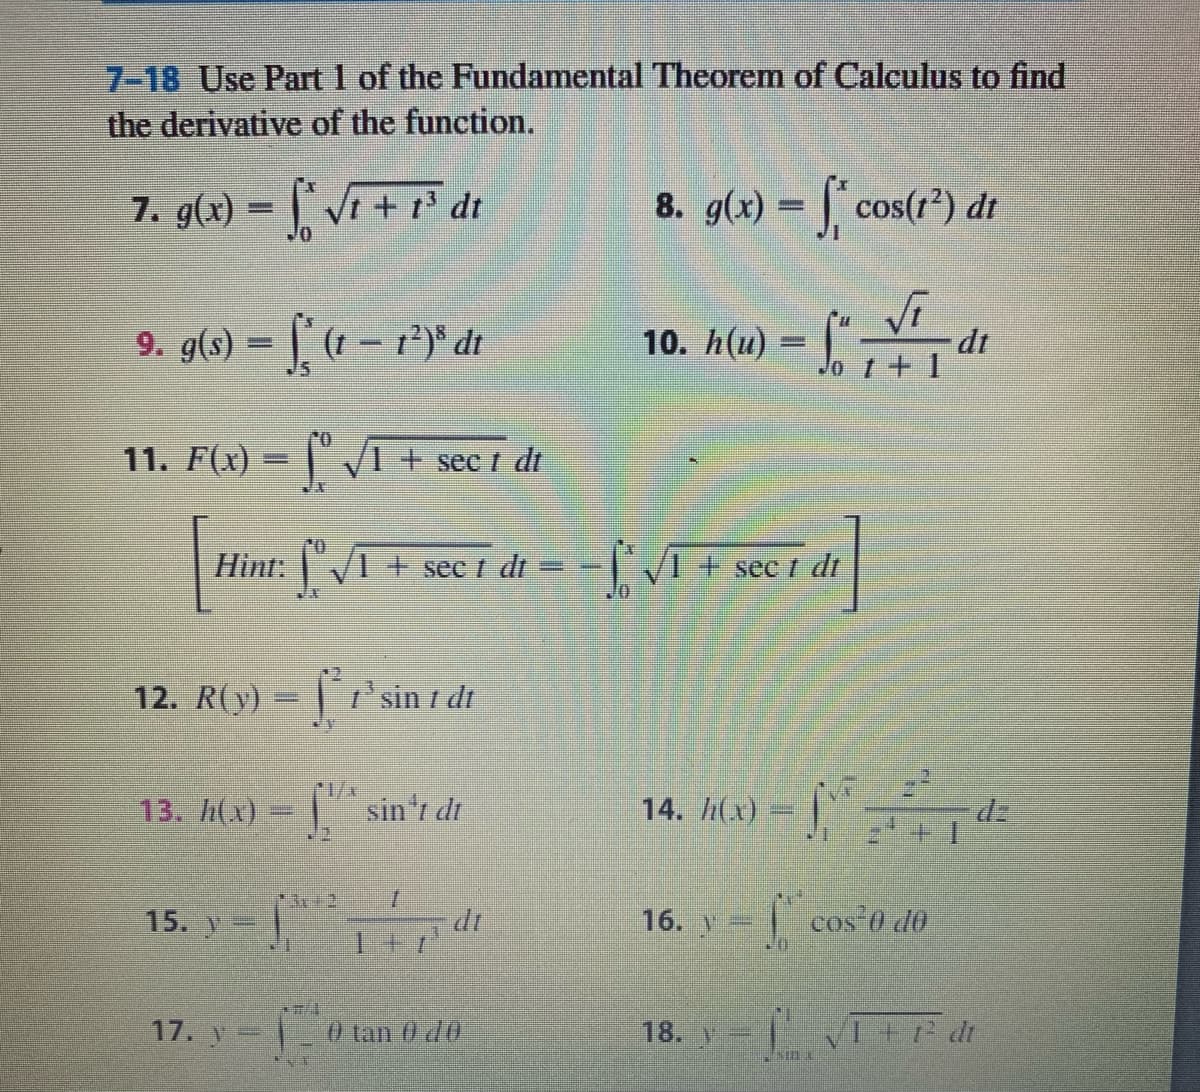 7-18 Use Part 1 of the Fundamental Theorem of Calculus to find
the derivative of the function.
7. g(4) = , Vi + r² dt
8. g(x) = | cos(r*) dt
9. g(s) = (1- r*)* dt
10. h(и)
dt
%3D
11. F(x) =
IVI + sec i dt
sec t
%3D
Hint: |"/1 + sec t dt = - | /1 + se
sec /
12. R(y)
Ti'sin I dt
r/x
13. h(x) = sin'r dt
h(x) = |"
dz
15. y
16. v=
cos 0 d0
17. V=
0 tan 0 d0
18. Y=
1+ dt
